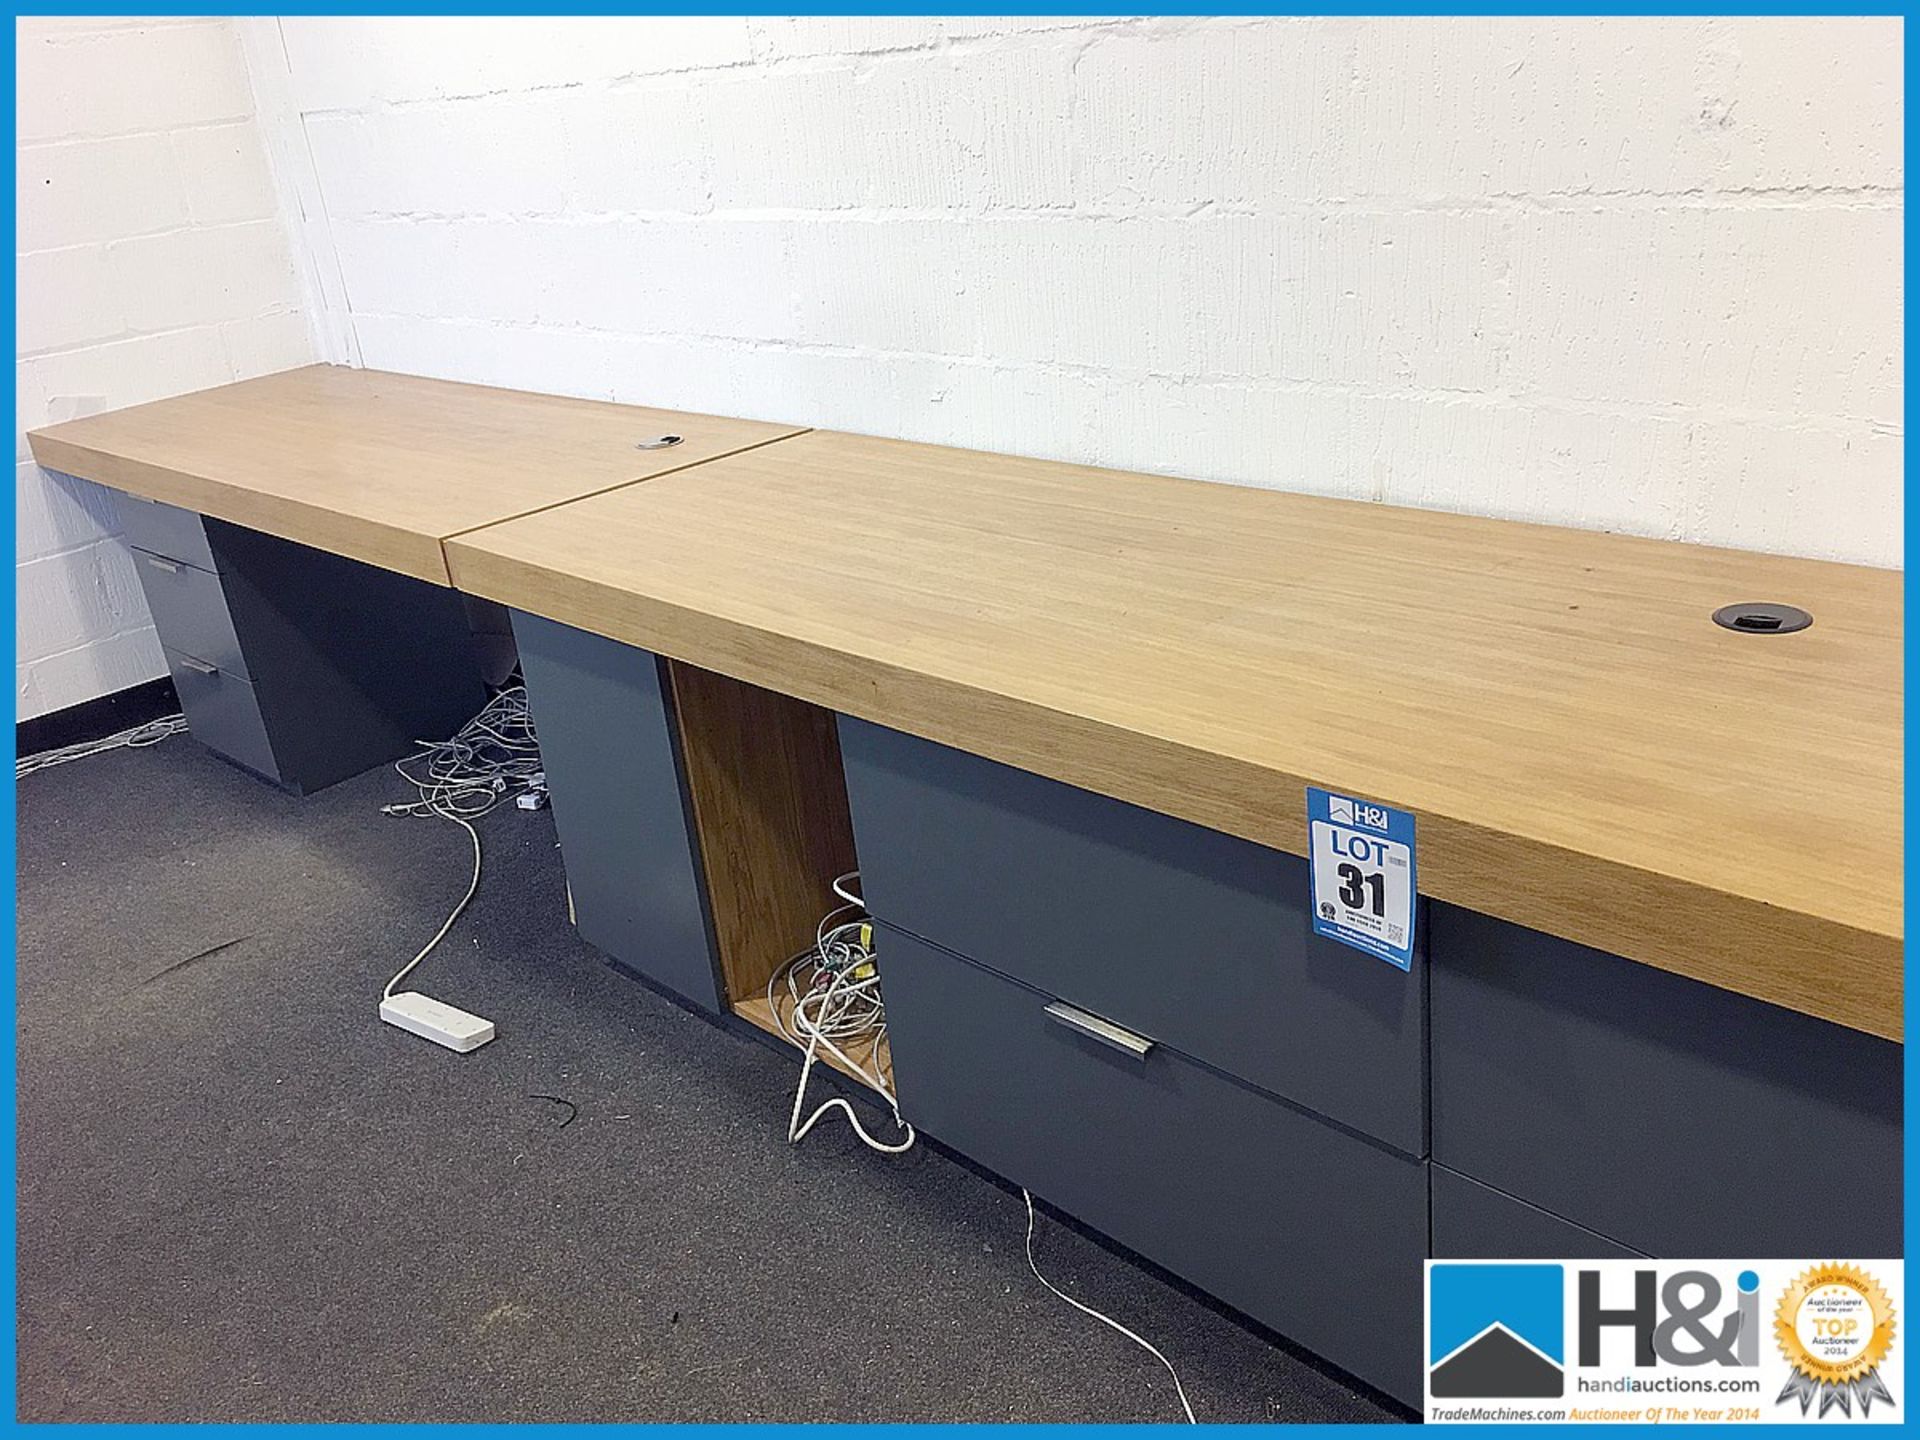 Very sturdy wooden desk assembly with drawers. Very nice construction. Overall 4.5m length. Can be - Image 3 of 3